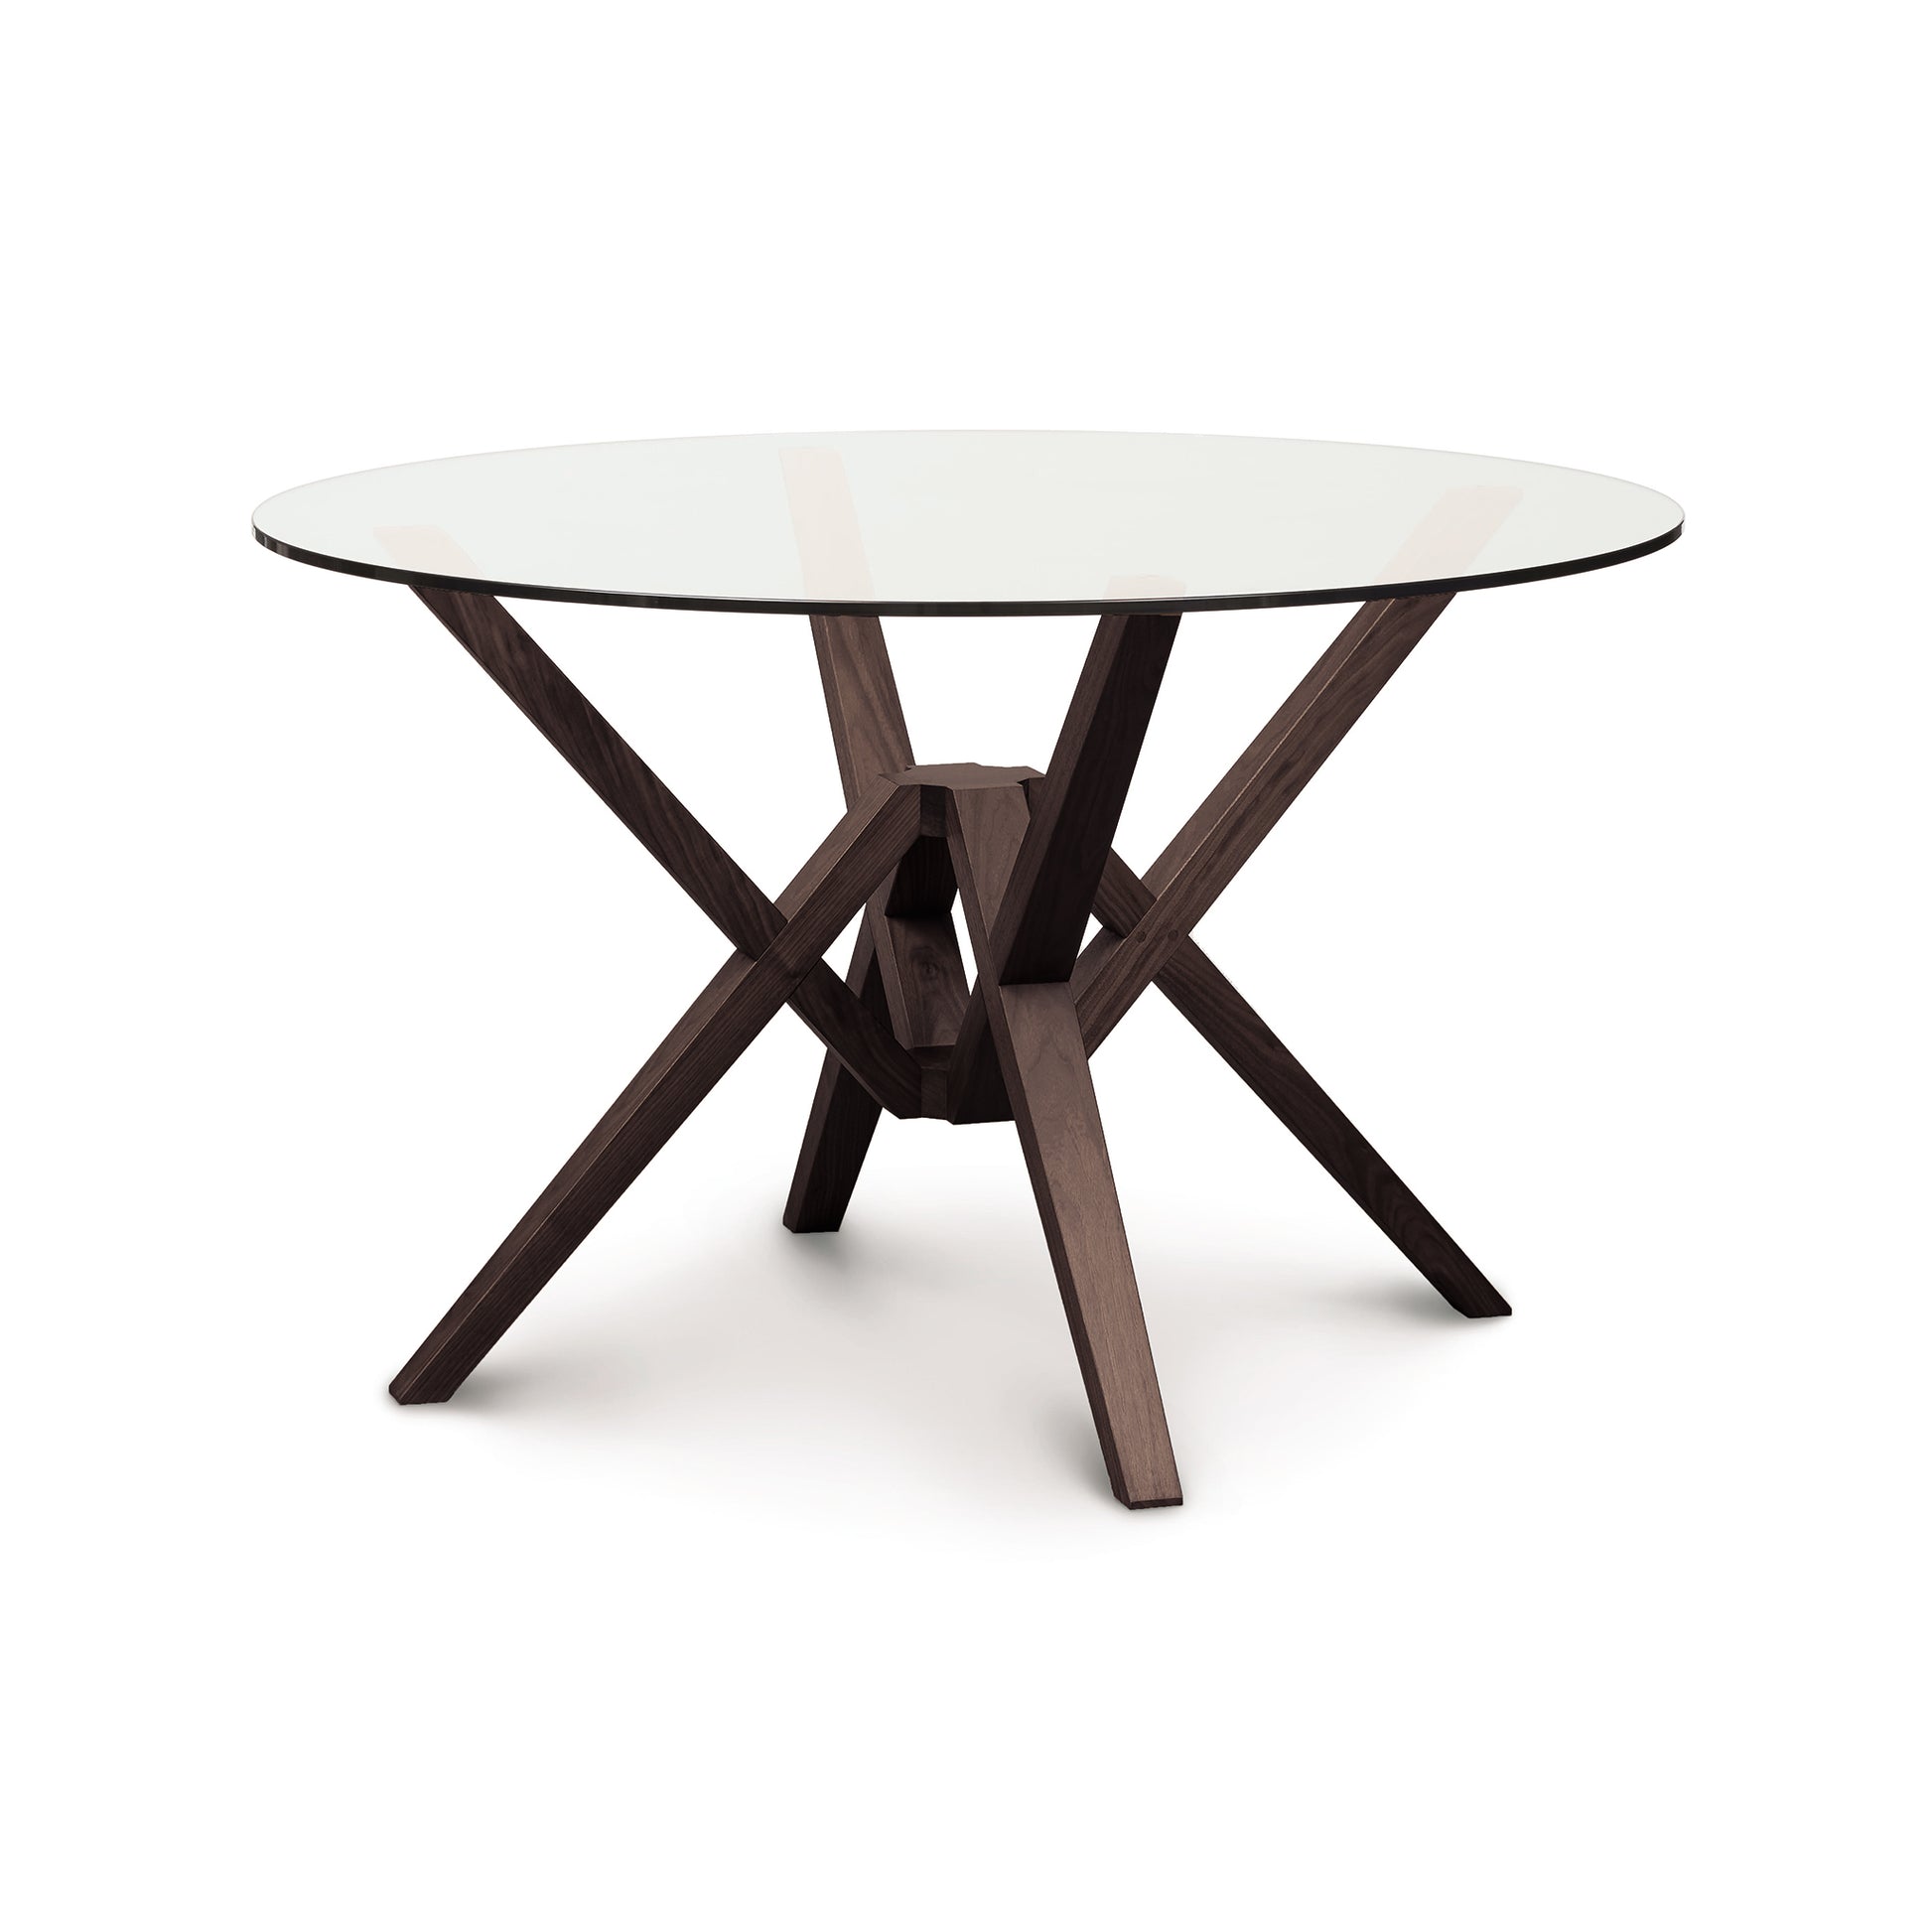 An innovative engineering marvel, the Copeland Furniture Exeter Round Glass Top Table showcases isometric design with its wooden base complementing the elegant glass surface.